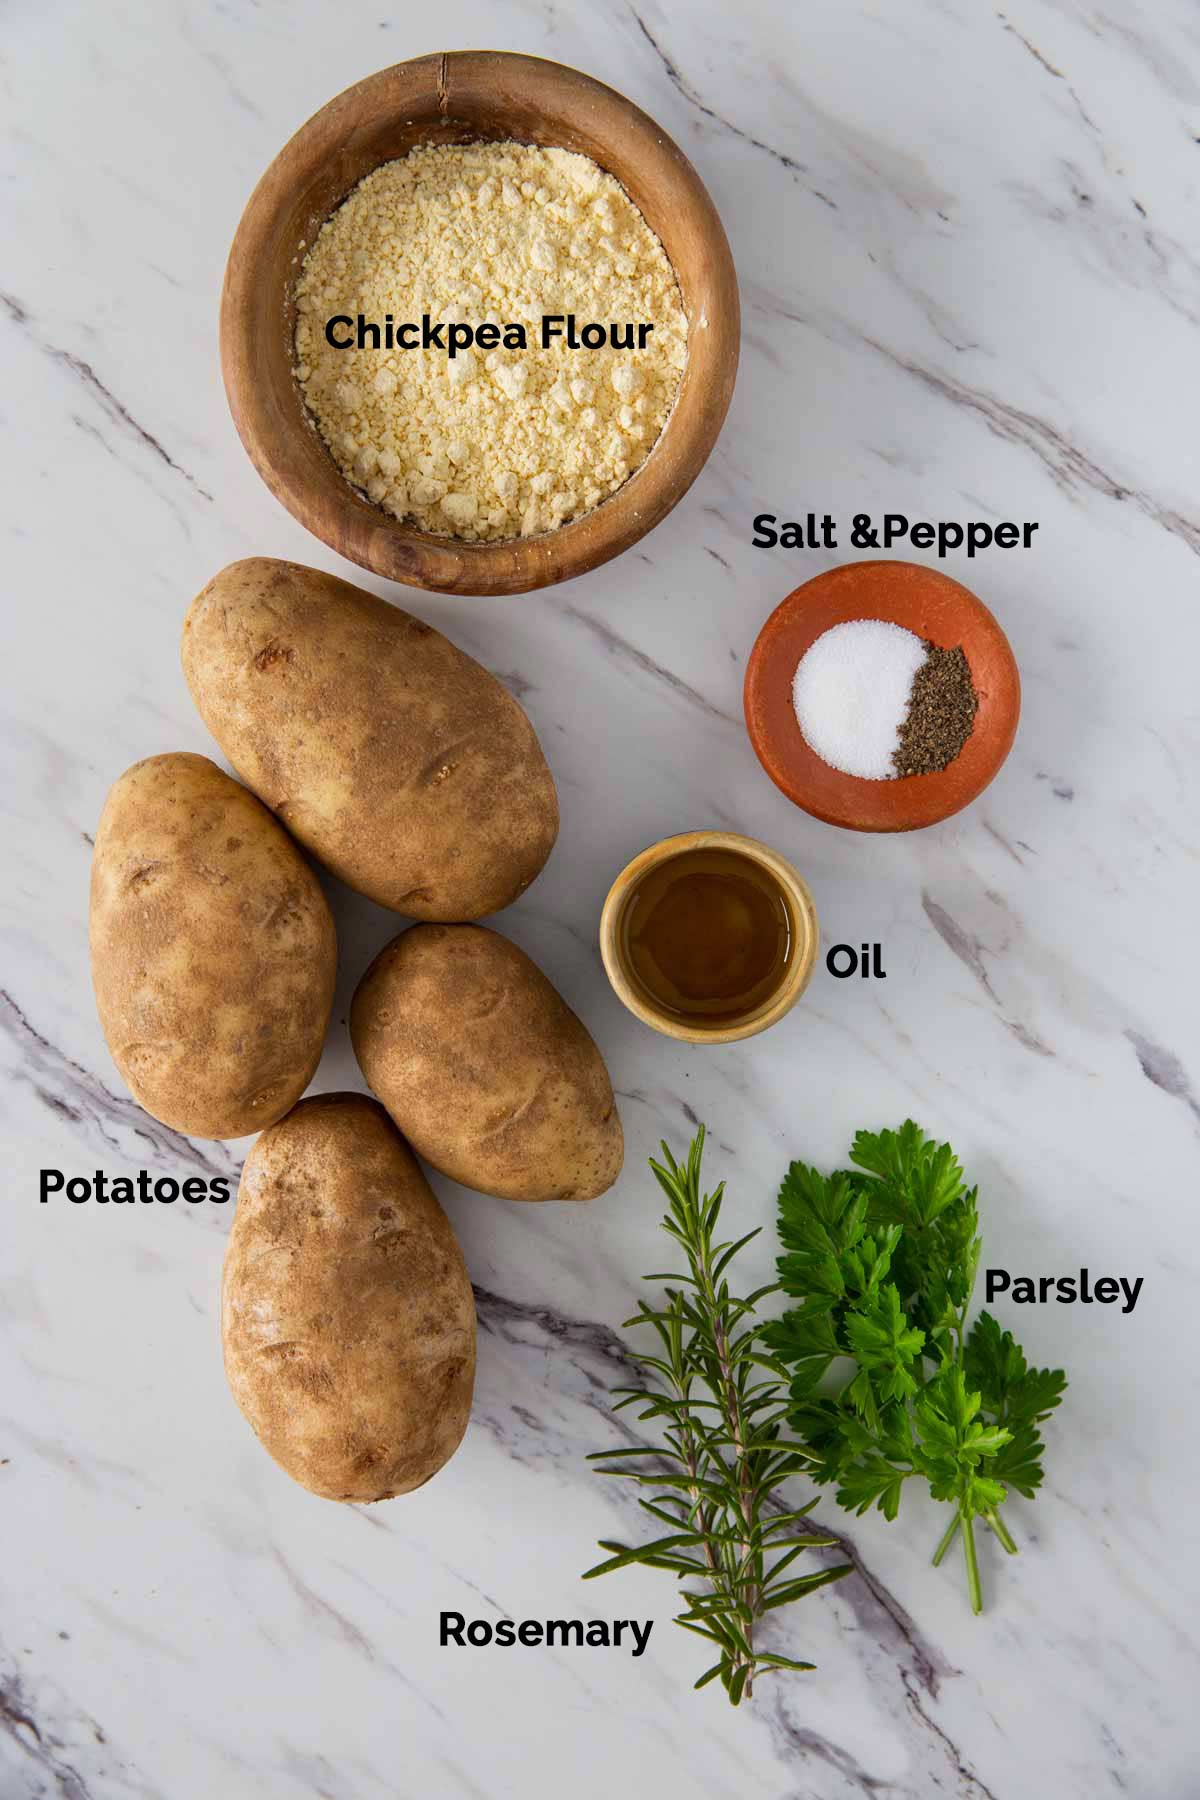 Image of ingredients for making potato fritters laid on a flat surface.